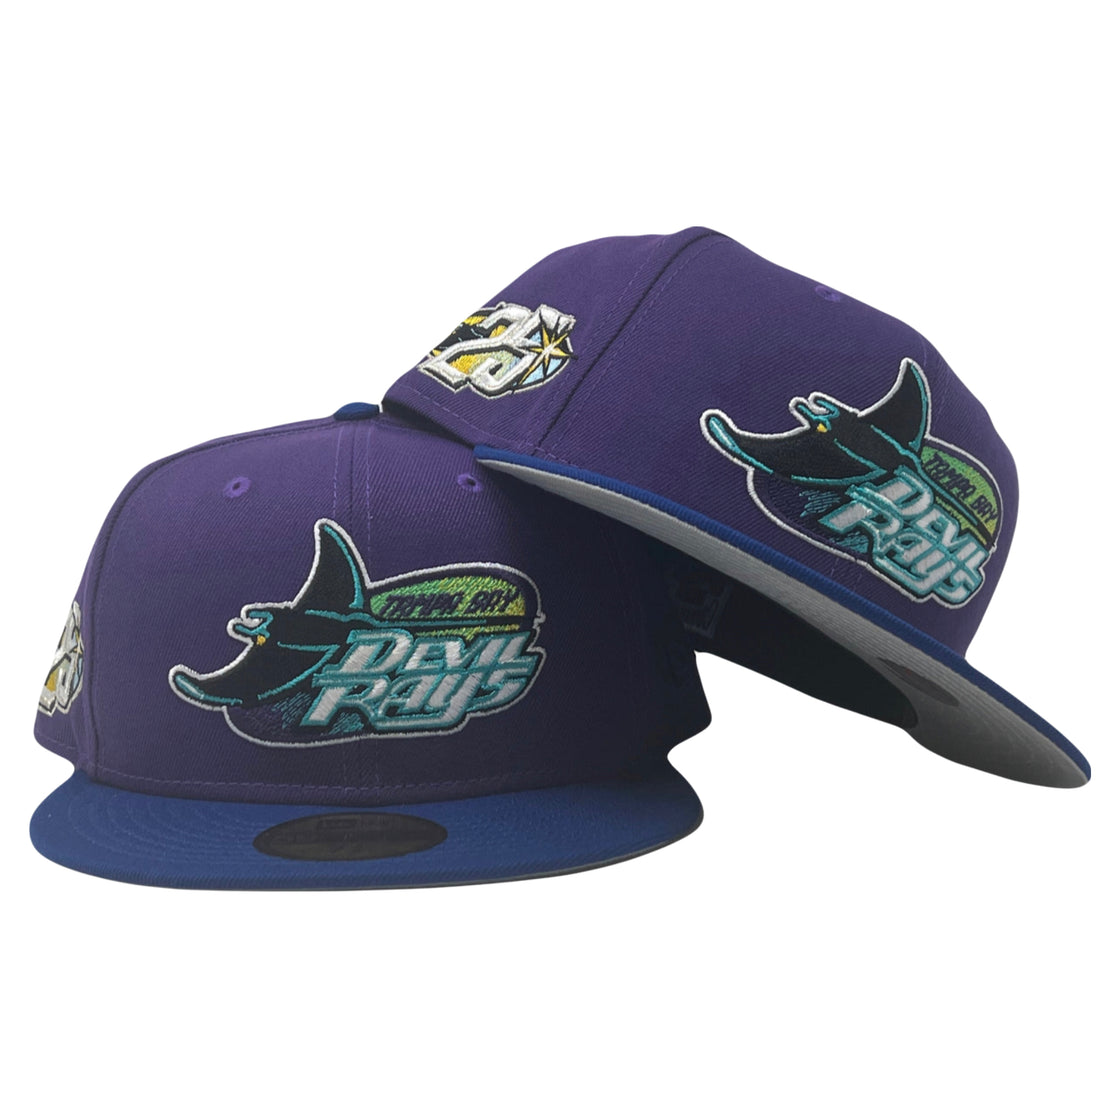 Tampa Bay Devil Rays 25th Anniversary New Era Fitted Hat